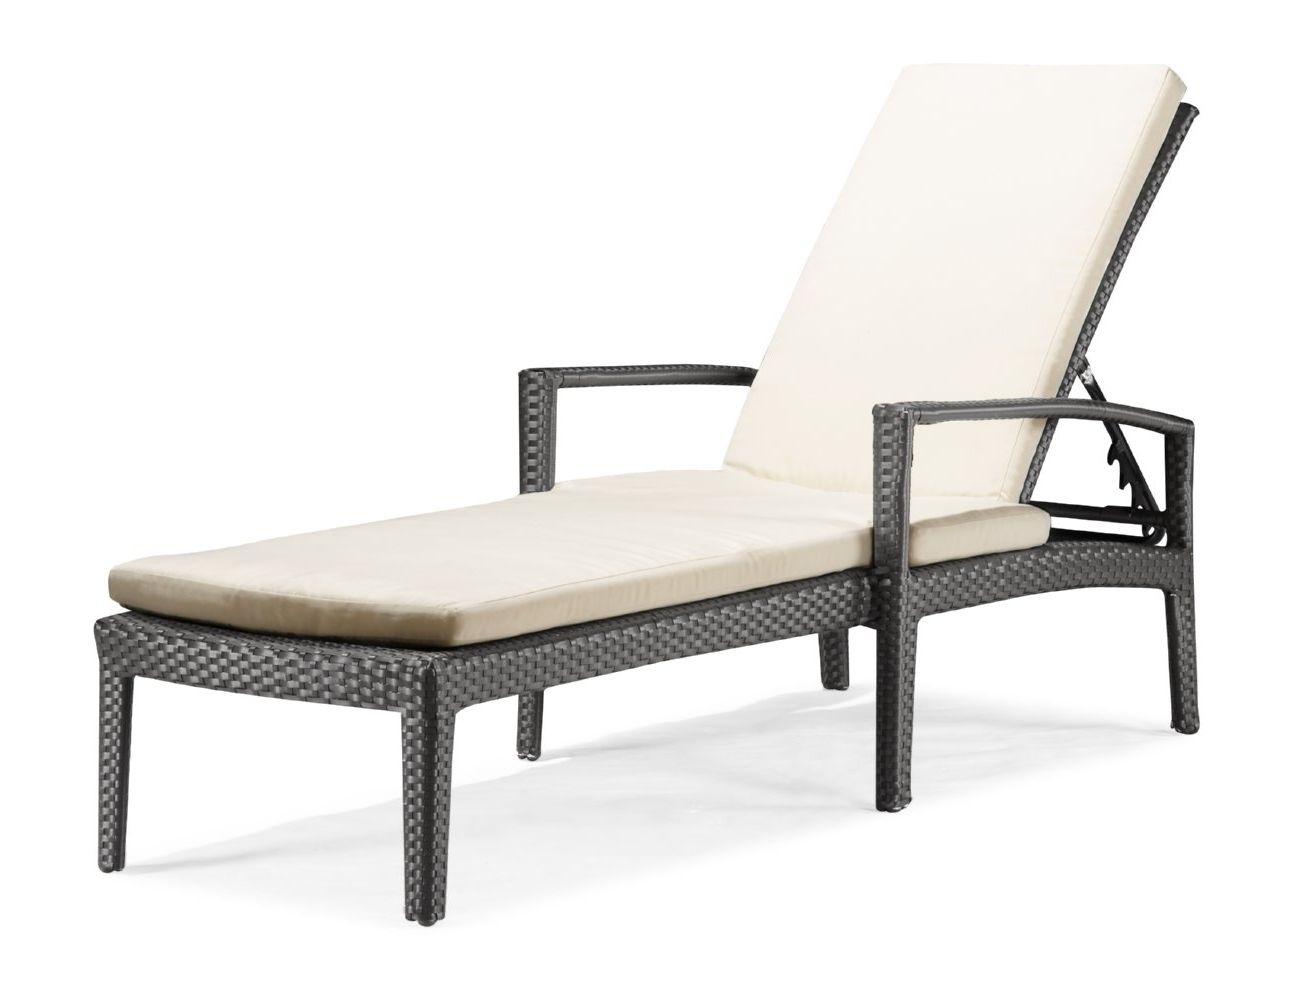 Newest Chaise Lounge Chairs For Pool Area In Lounge Chair : Patio Table Patio Furniture Cushions Double Lounge (View 10 of 15)